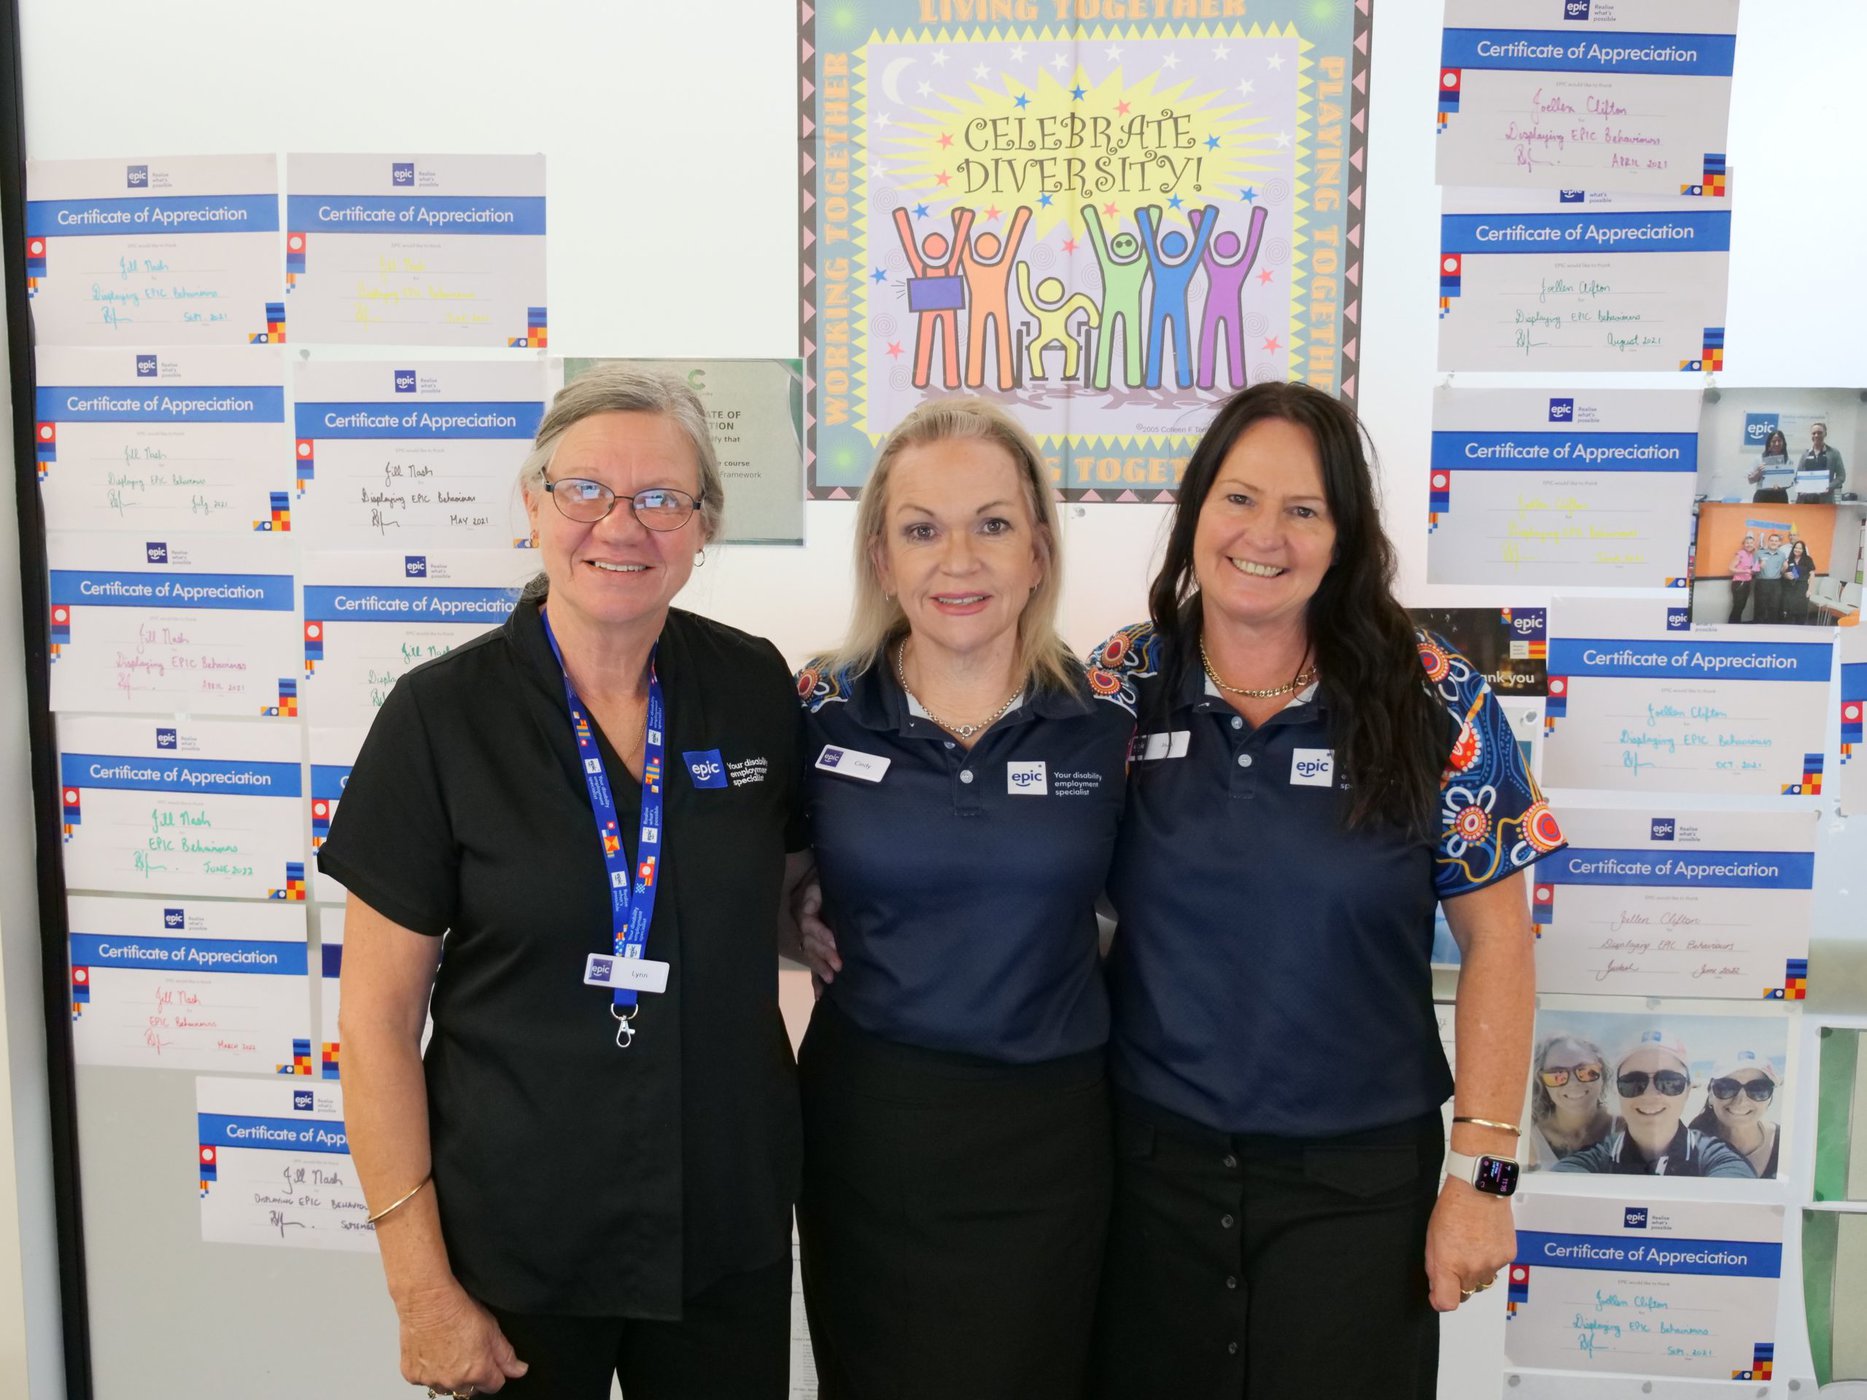 Three EPIC staff members, Lyn, Cindy and Jo, smile at the camera in front of a Celebrate Diversity poster